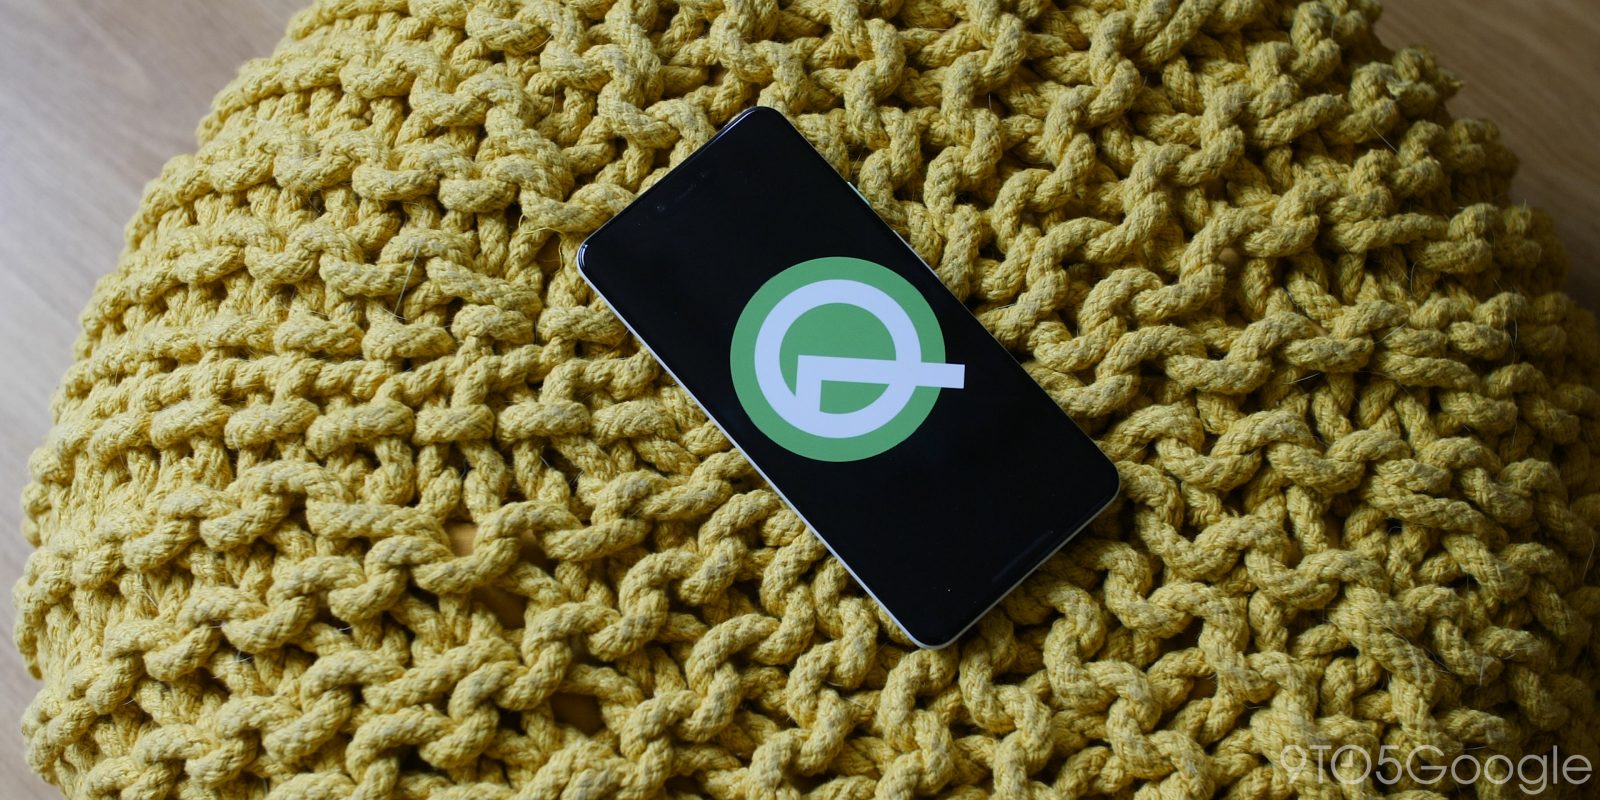 Android Q security release notes